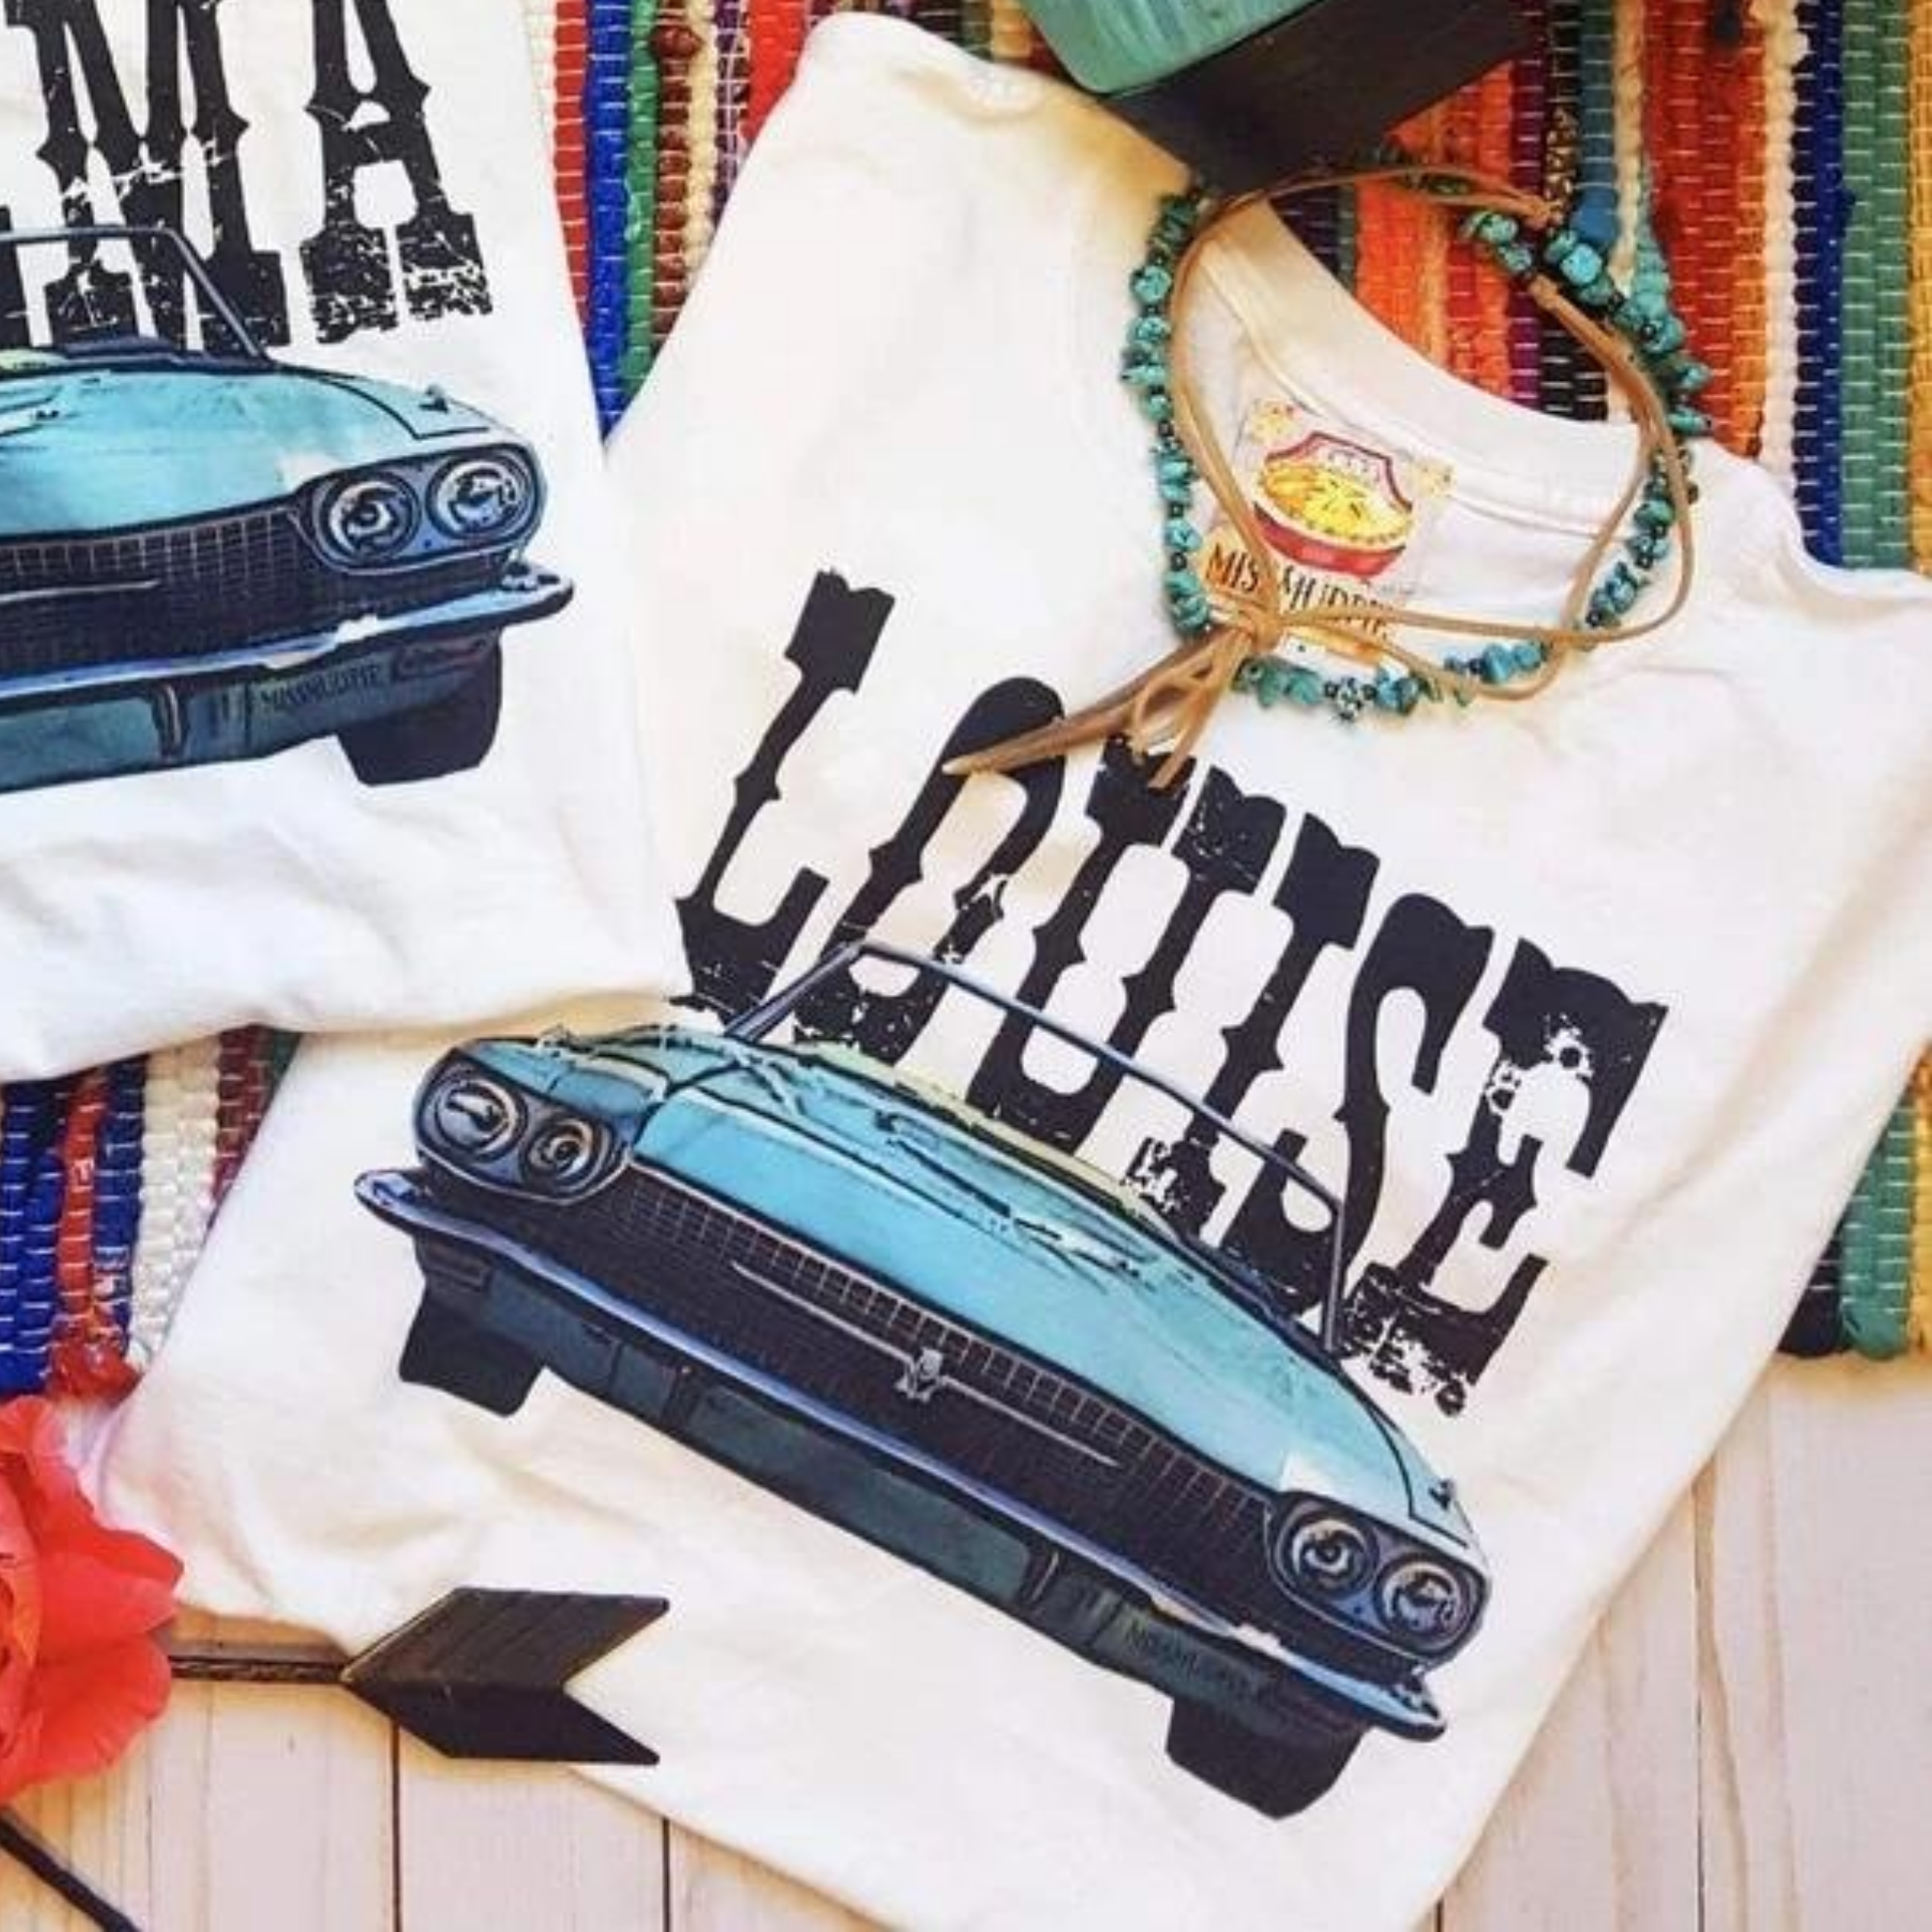 A white tee shirt folded into a rectangle exposing the vintage car graphic that says "Louise" above. Pictured with a turquoise necklace on a serape rug.